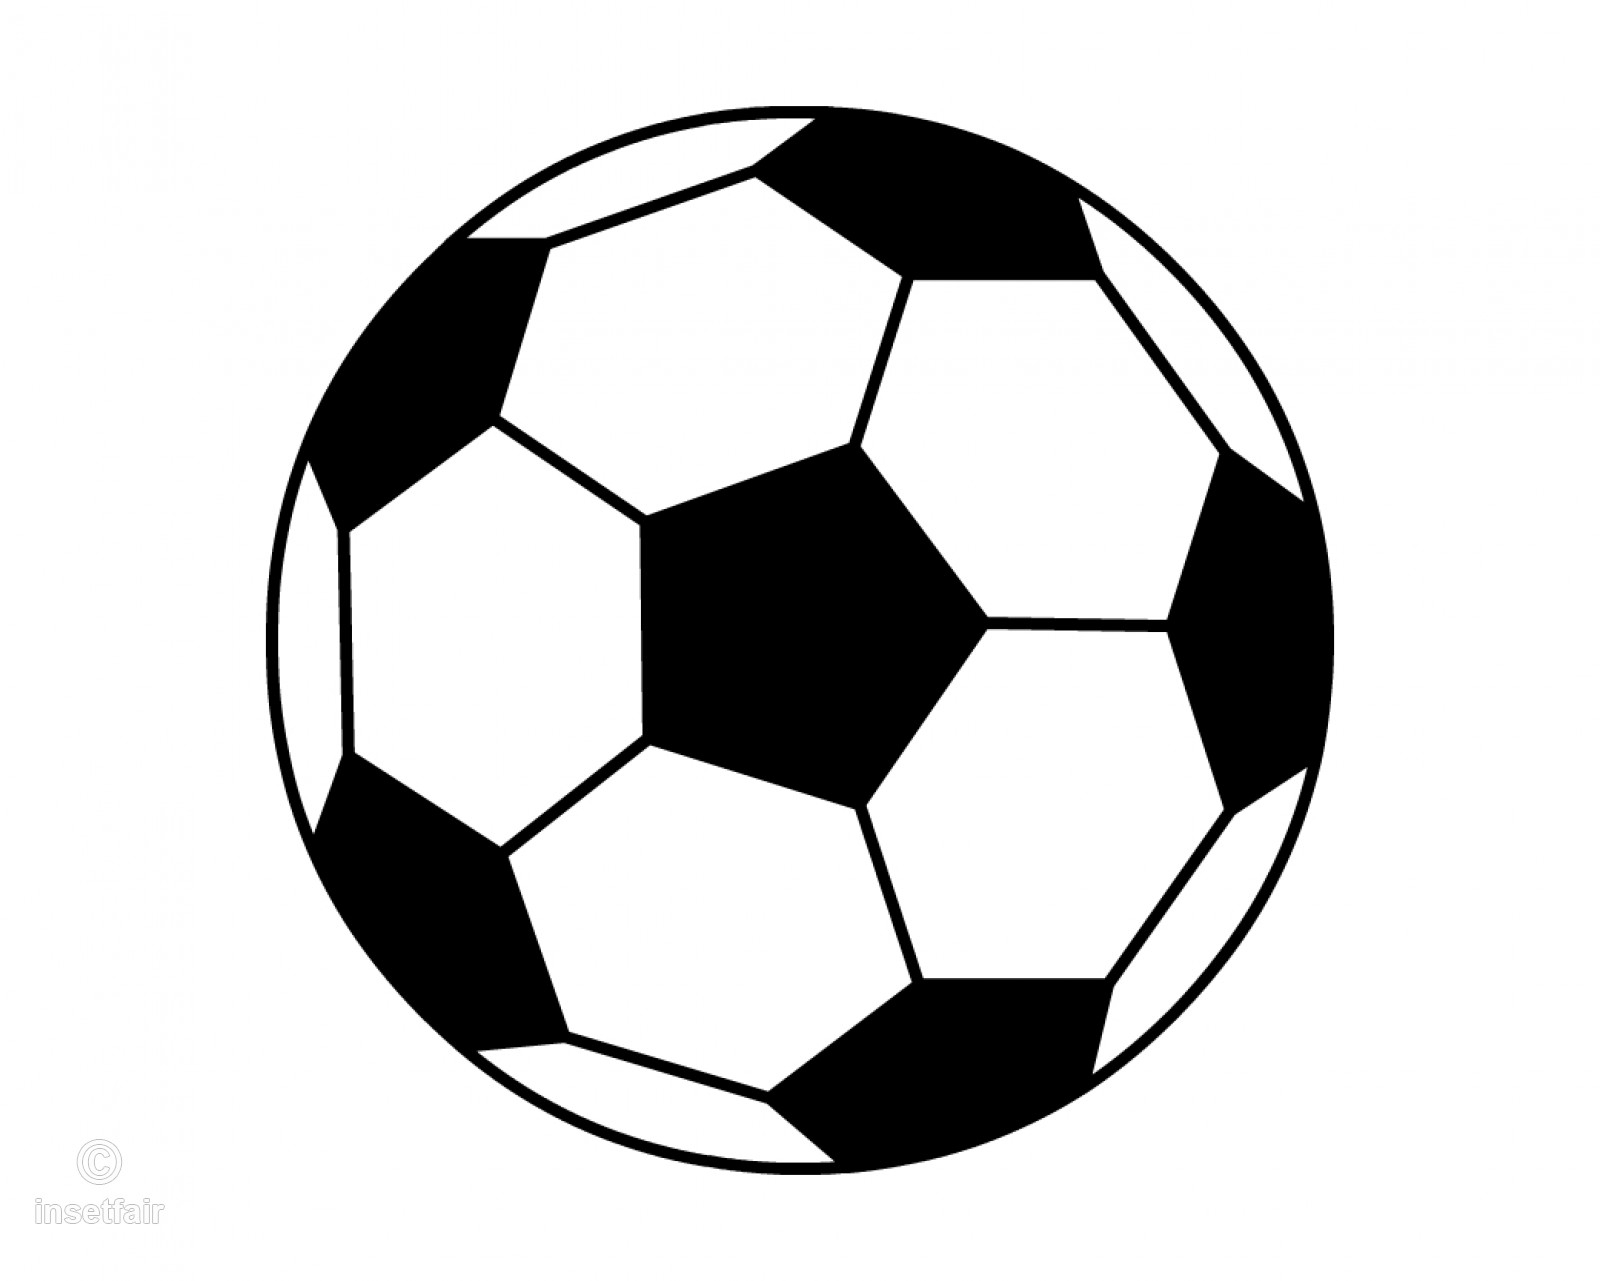 Awesome Football Clipart Black and White